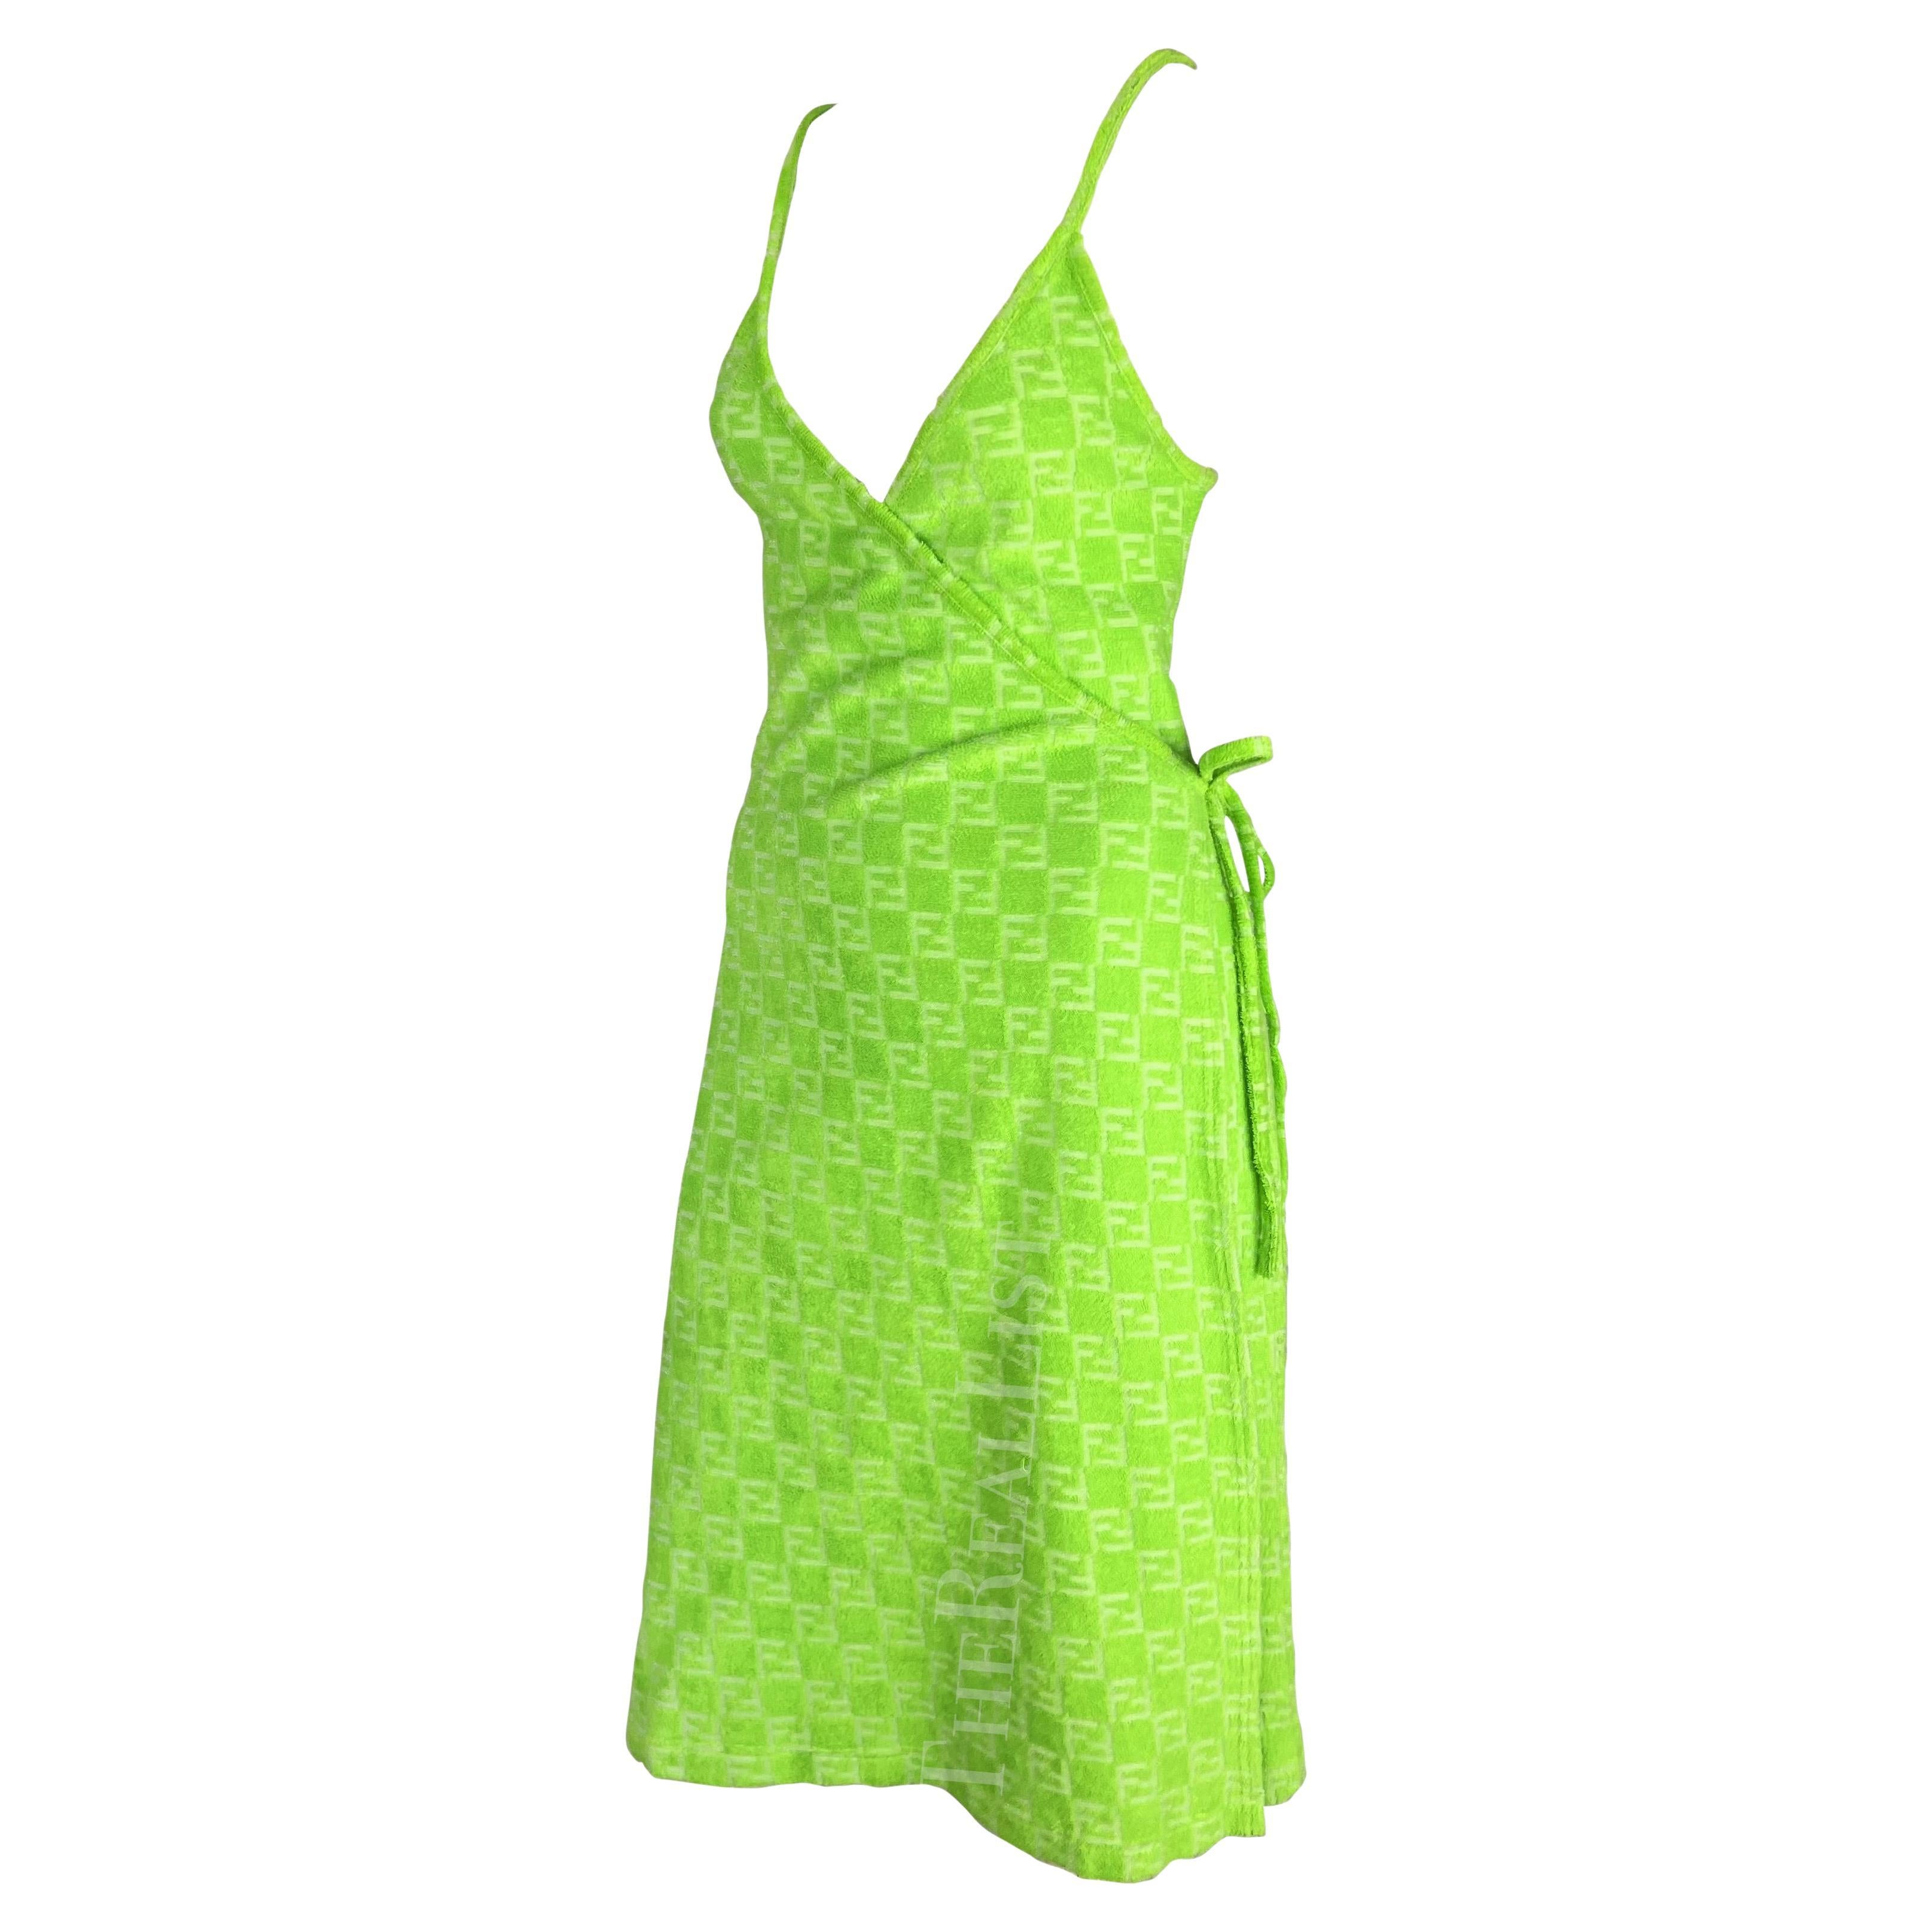 Presenting an incredible neon green Fendi wrap dress, designed by Karl Lagerfeld. From the 1990s, this wrap dress is constructed entirely of terrycloth with the Fendi 'FF' monogram logo embossed throughout. Simple and chic, this dress features a